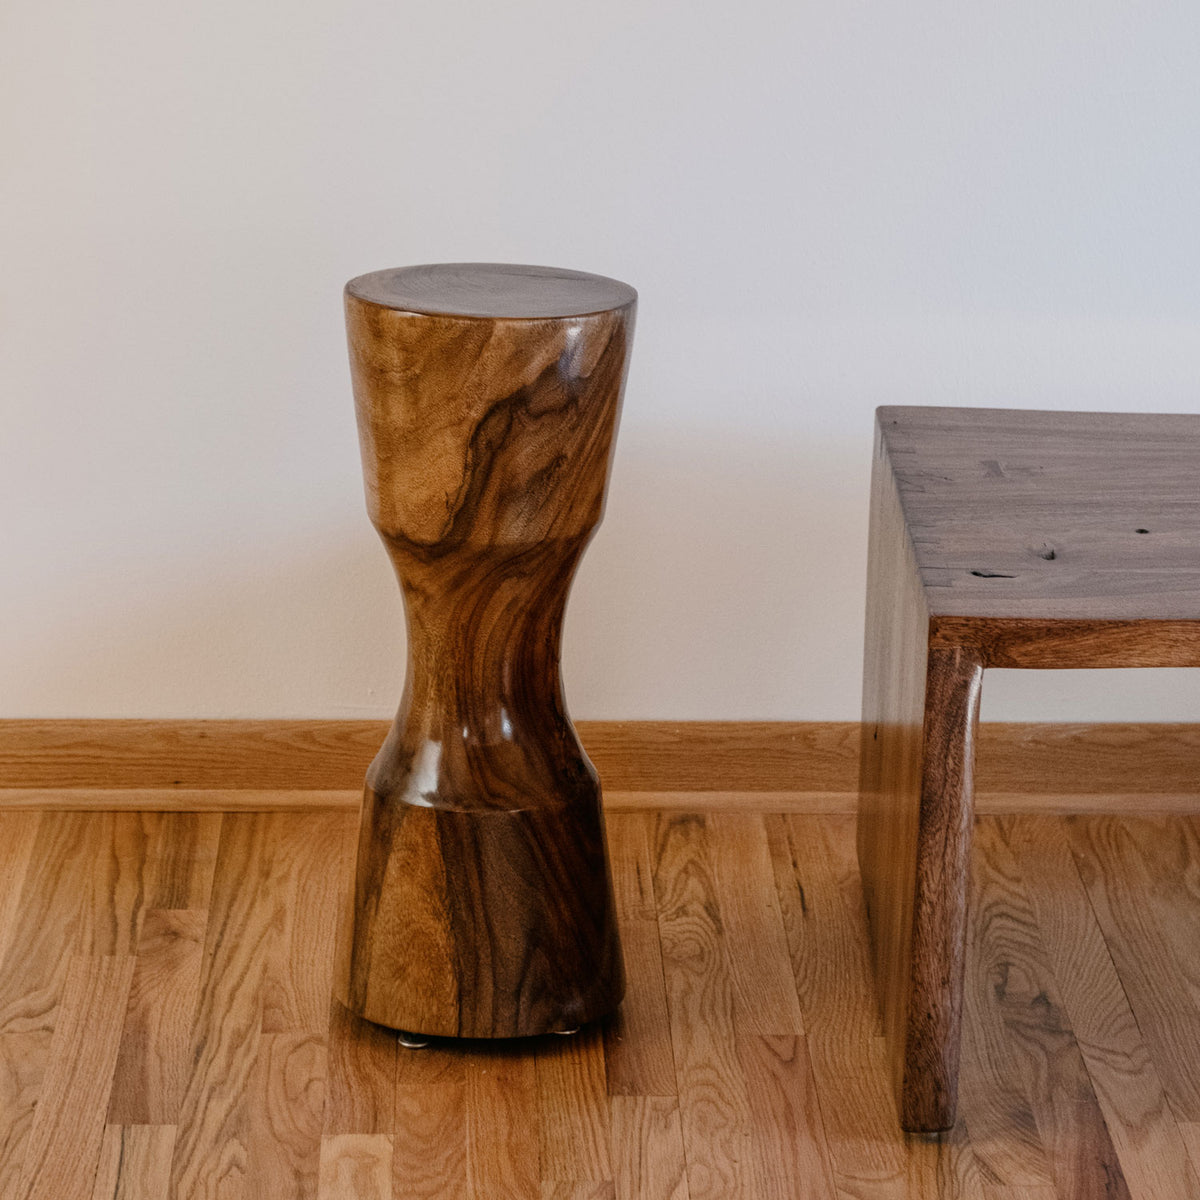 Stone Forest Rook Pedestals are hand-turned and finished, each is a little different in height and diameter. Made from Indian Rosewood. image 2 of 3